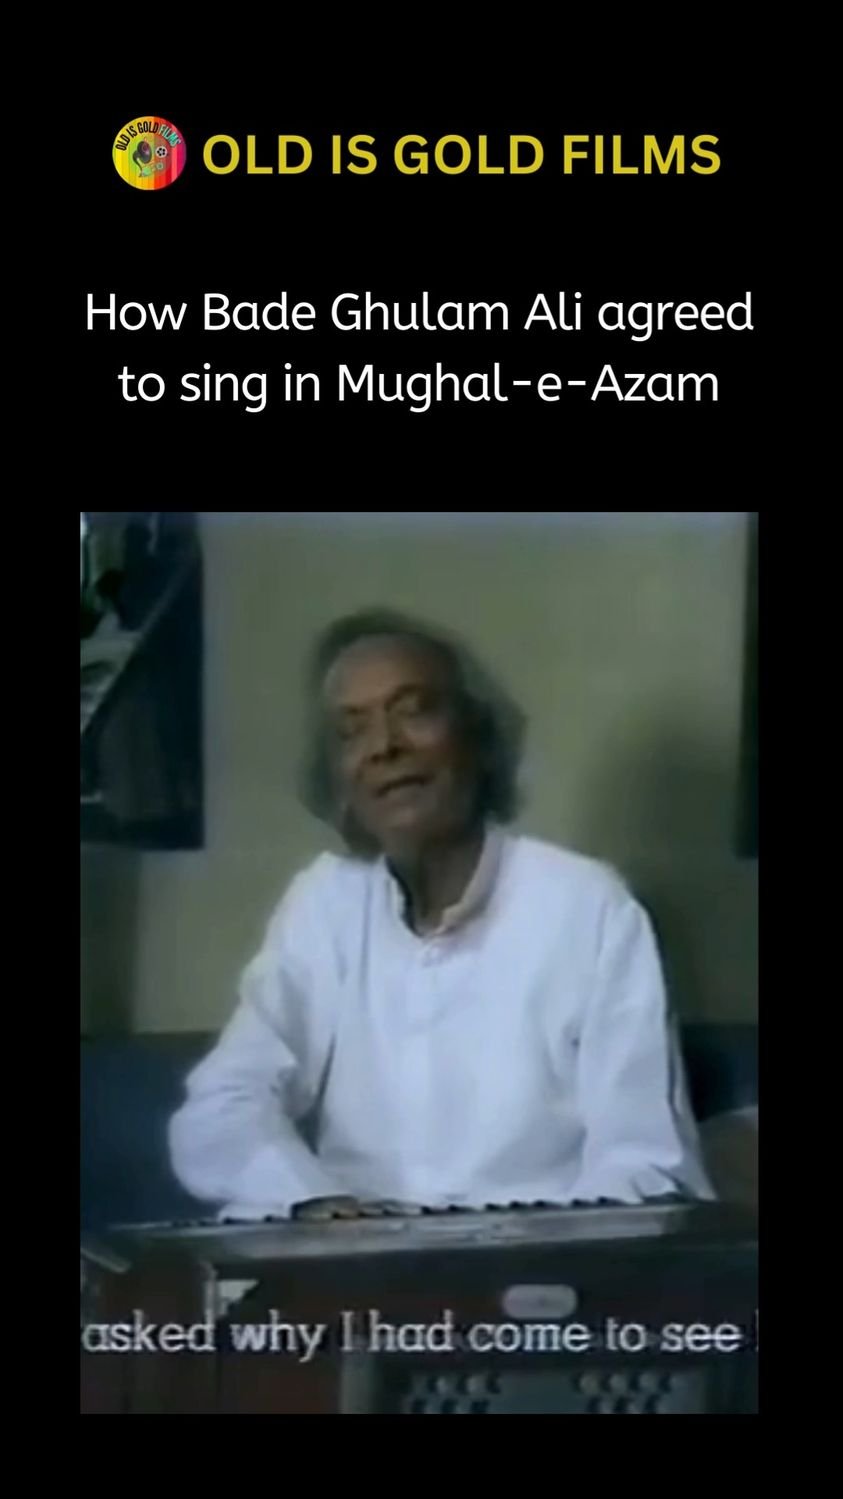 How Bade Ghulam Ali agreed to sing in Mughal-e-Azam